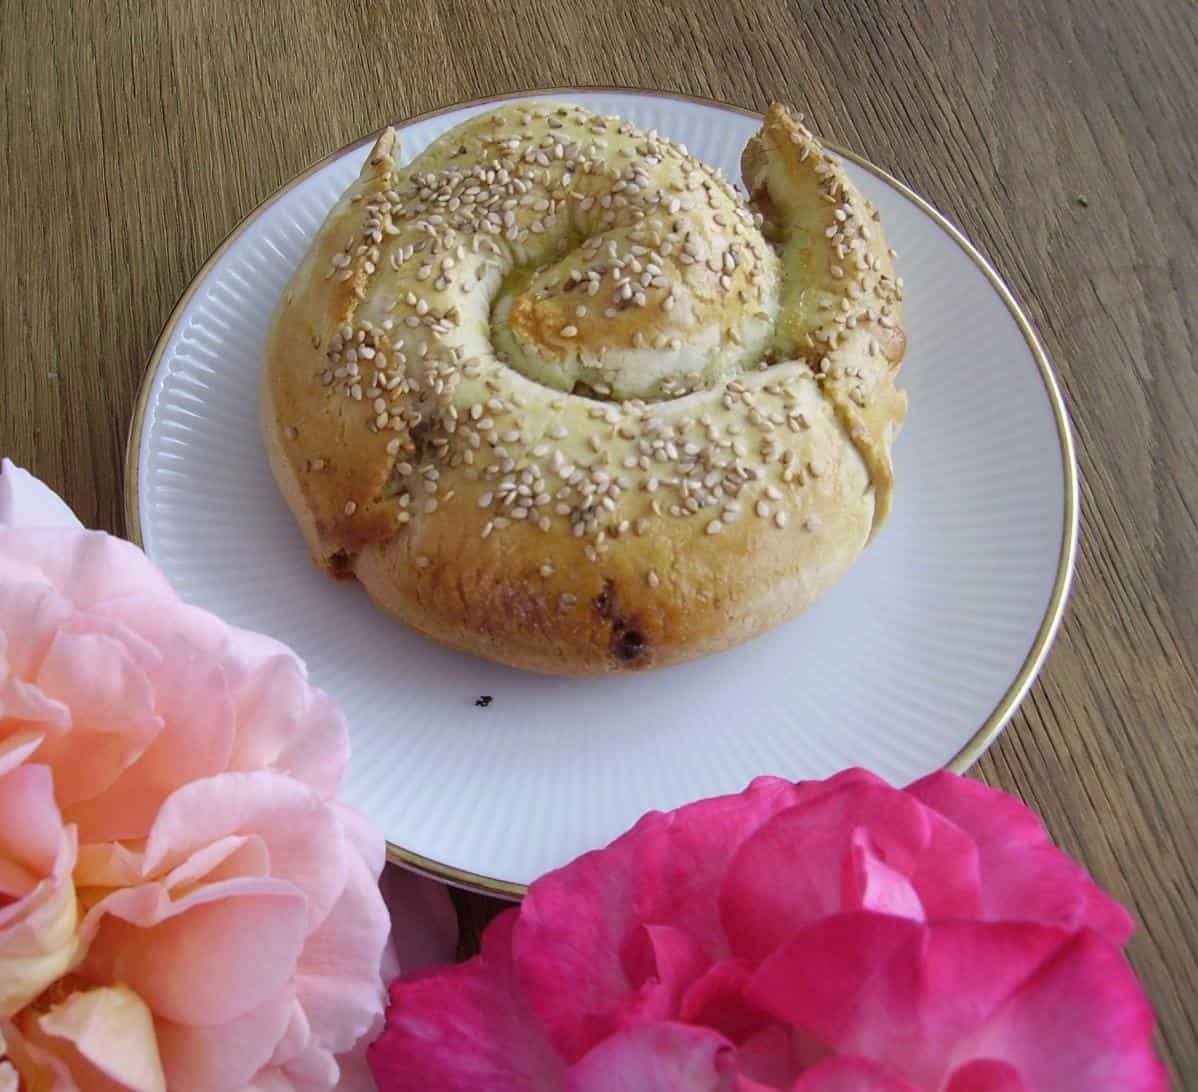  Middle Eastern-inspired bread recipe that's definitely worth trying